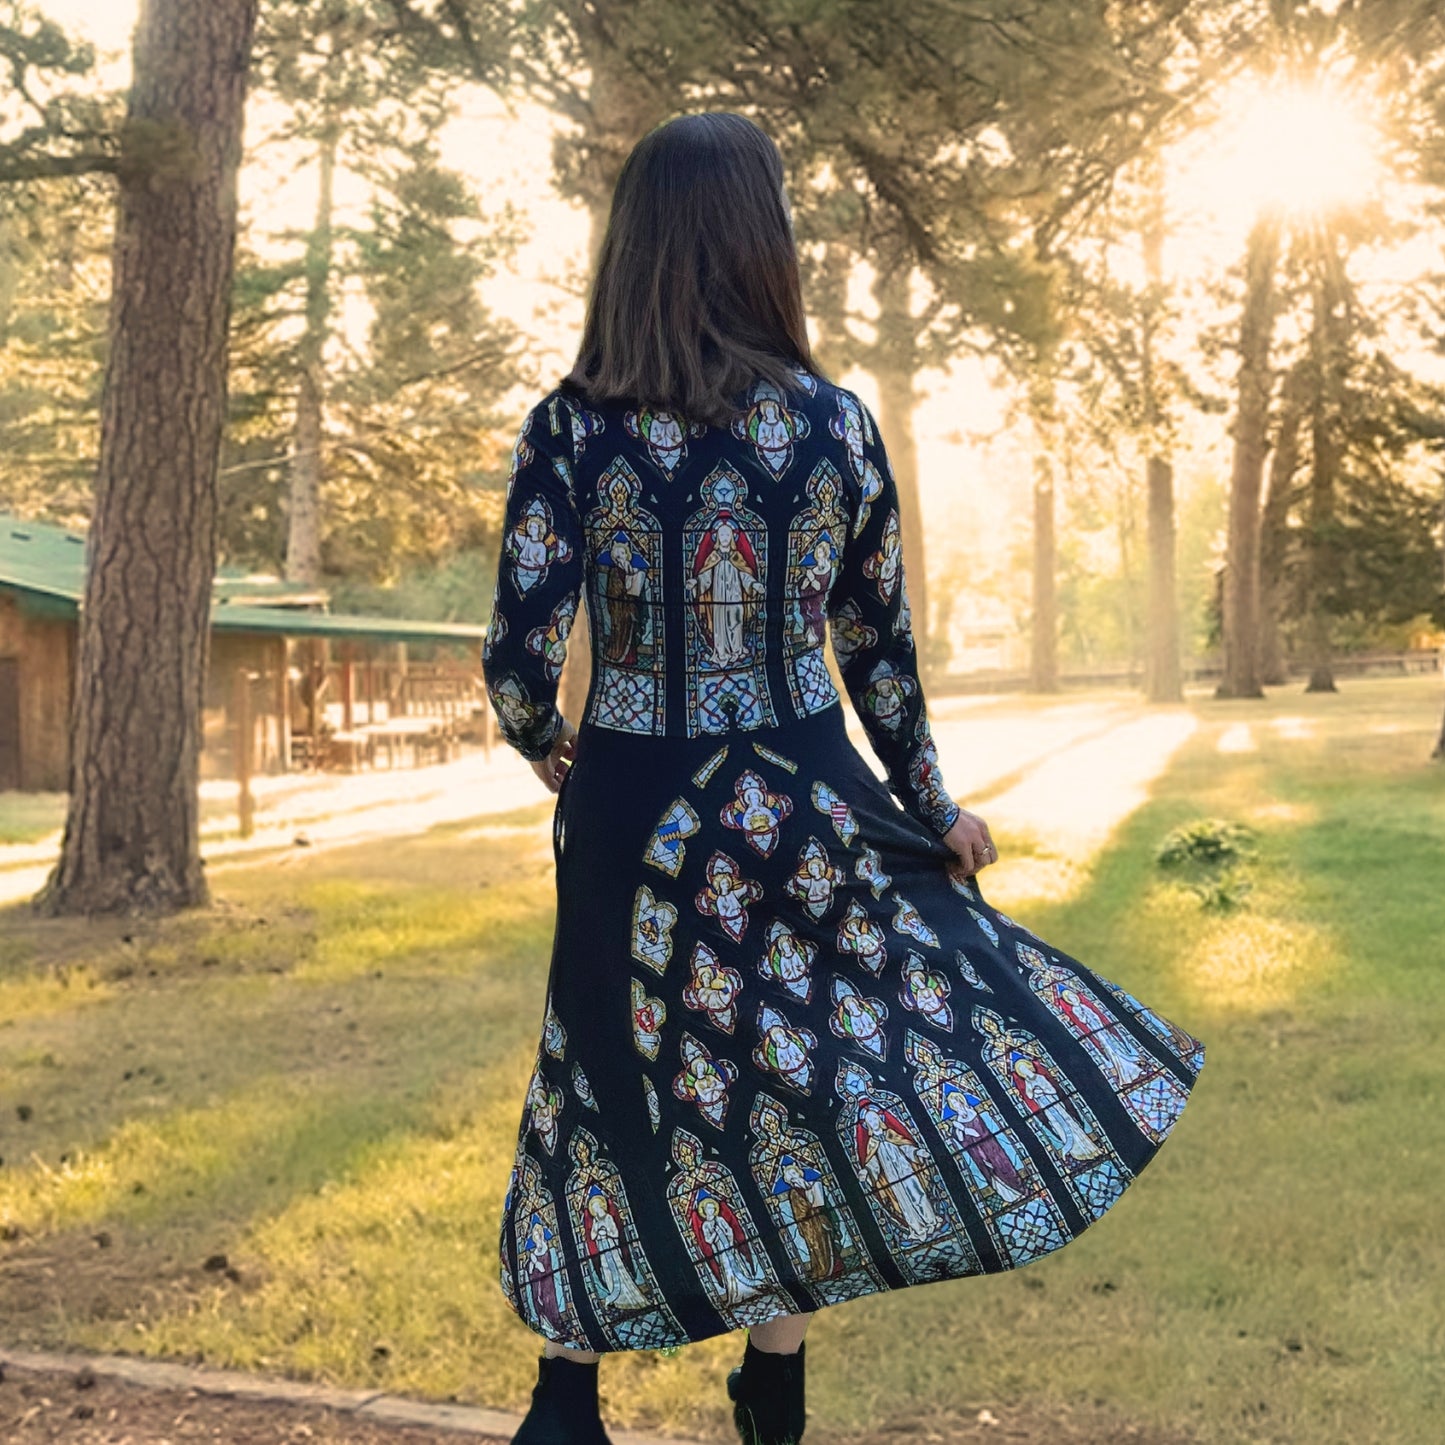 Transfiguration Stained Glass Dress (with Pockets)